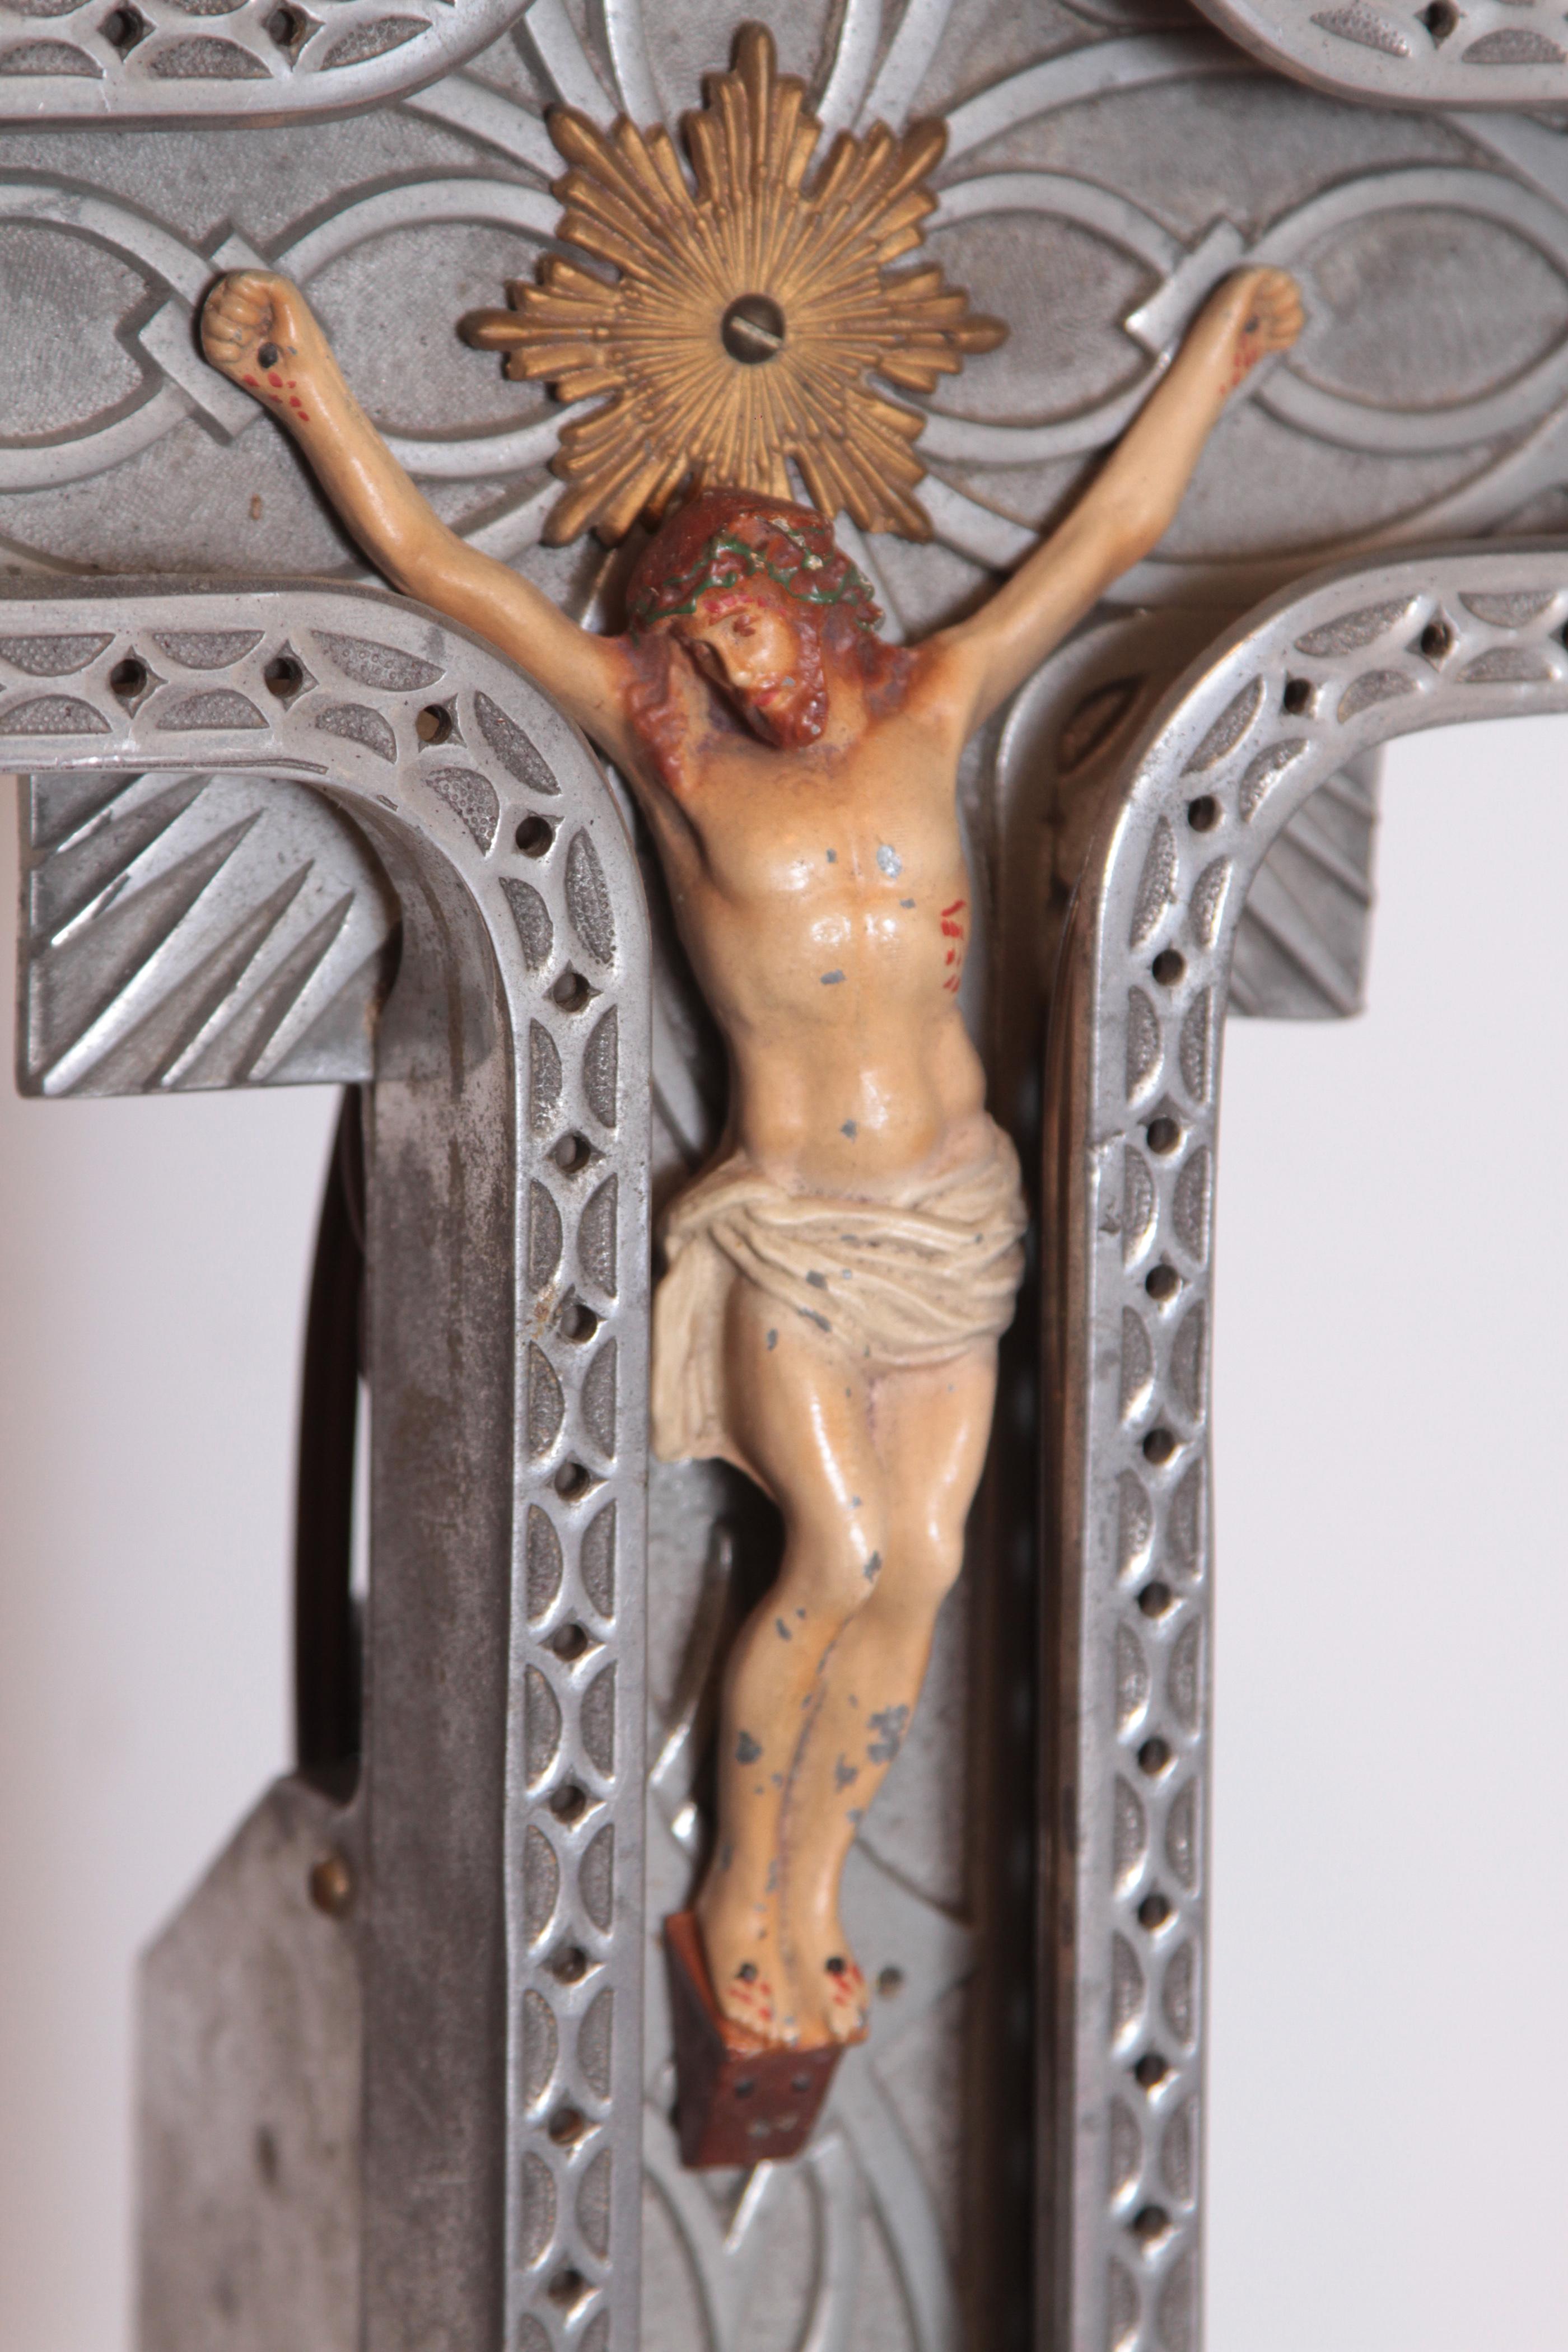 Art Deco Neon Crucifix, Cast Metal, Hand-Painted, with Stand in Case INRI 2